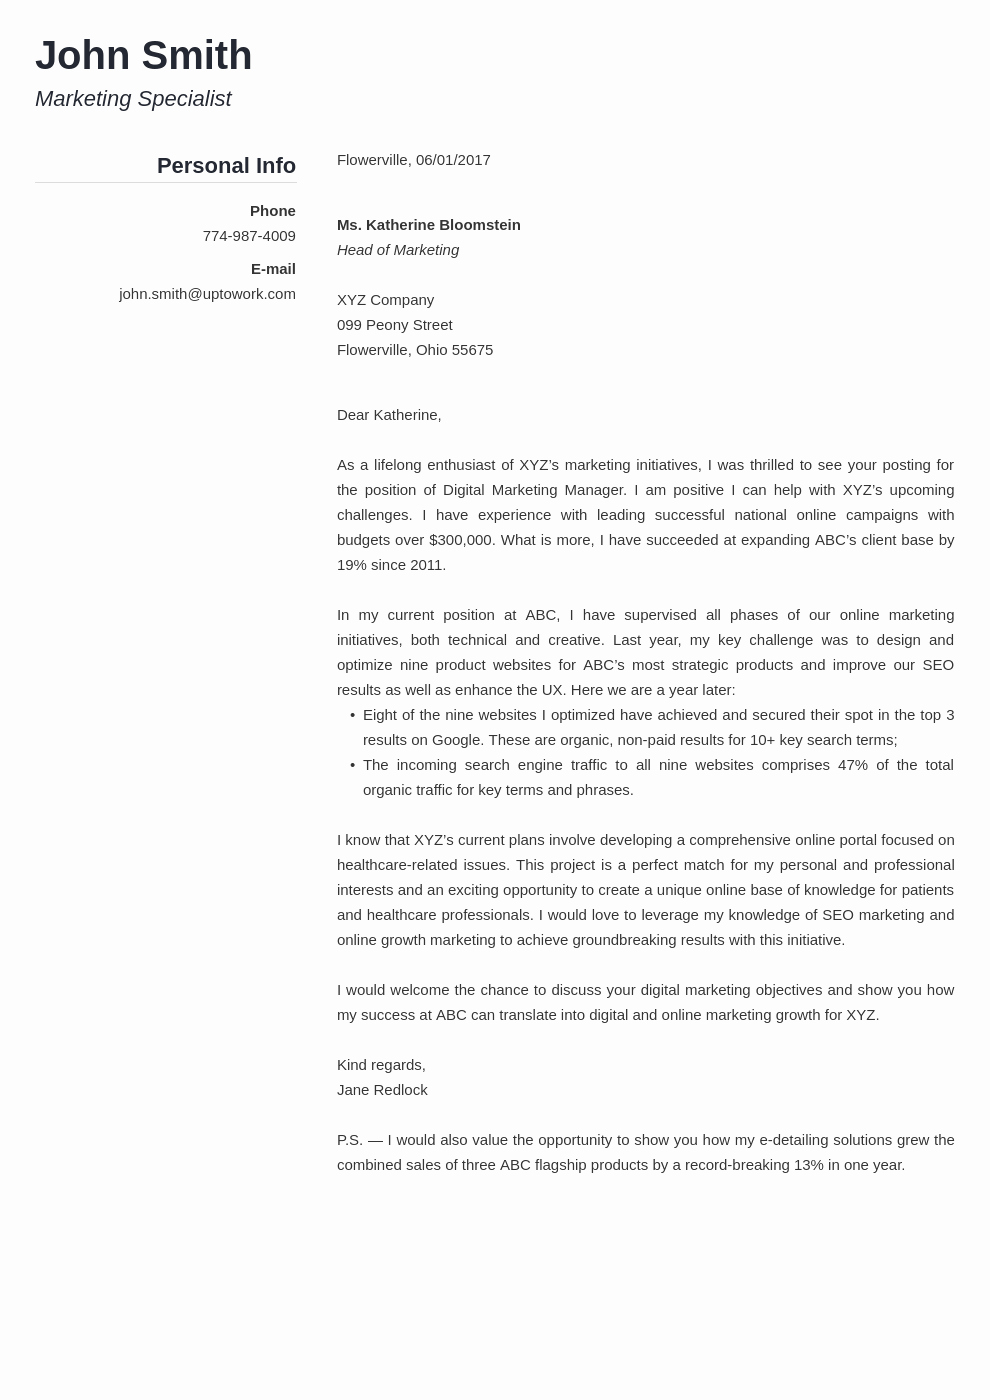 Letter Outline Template Awesome 20 Cover Letter Templates [download] Create Your Cover